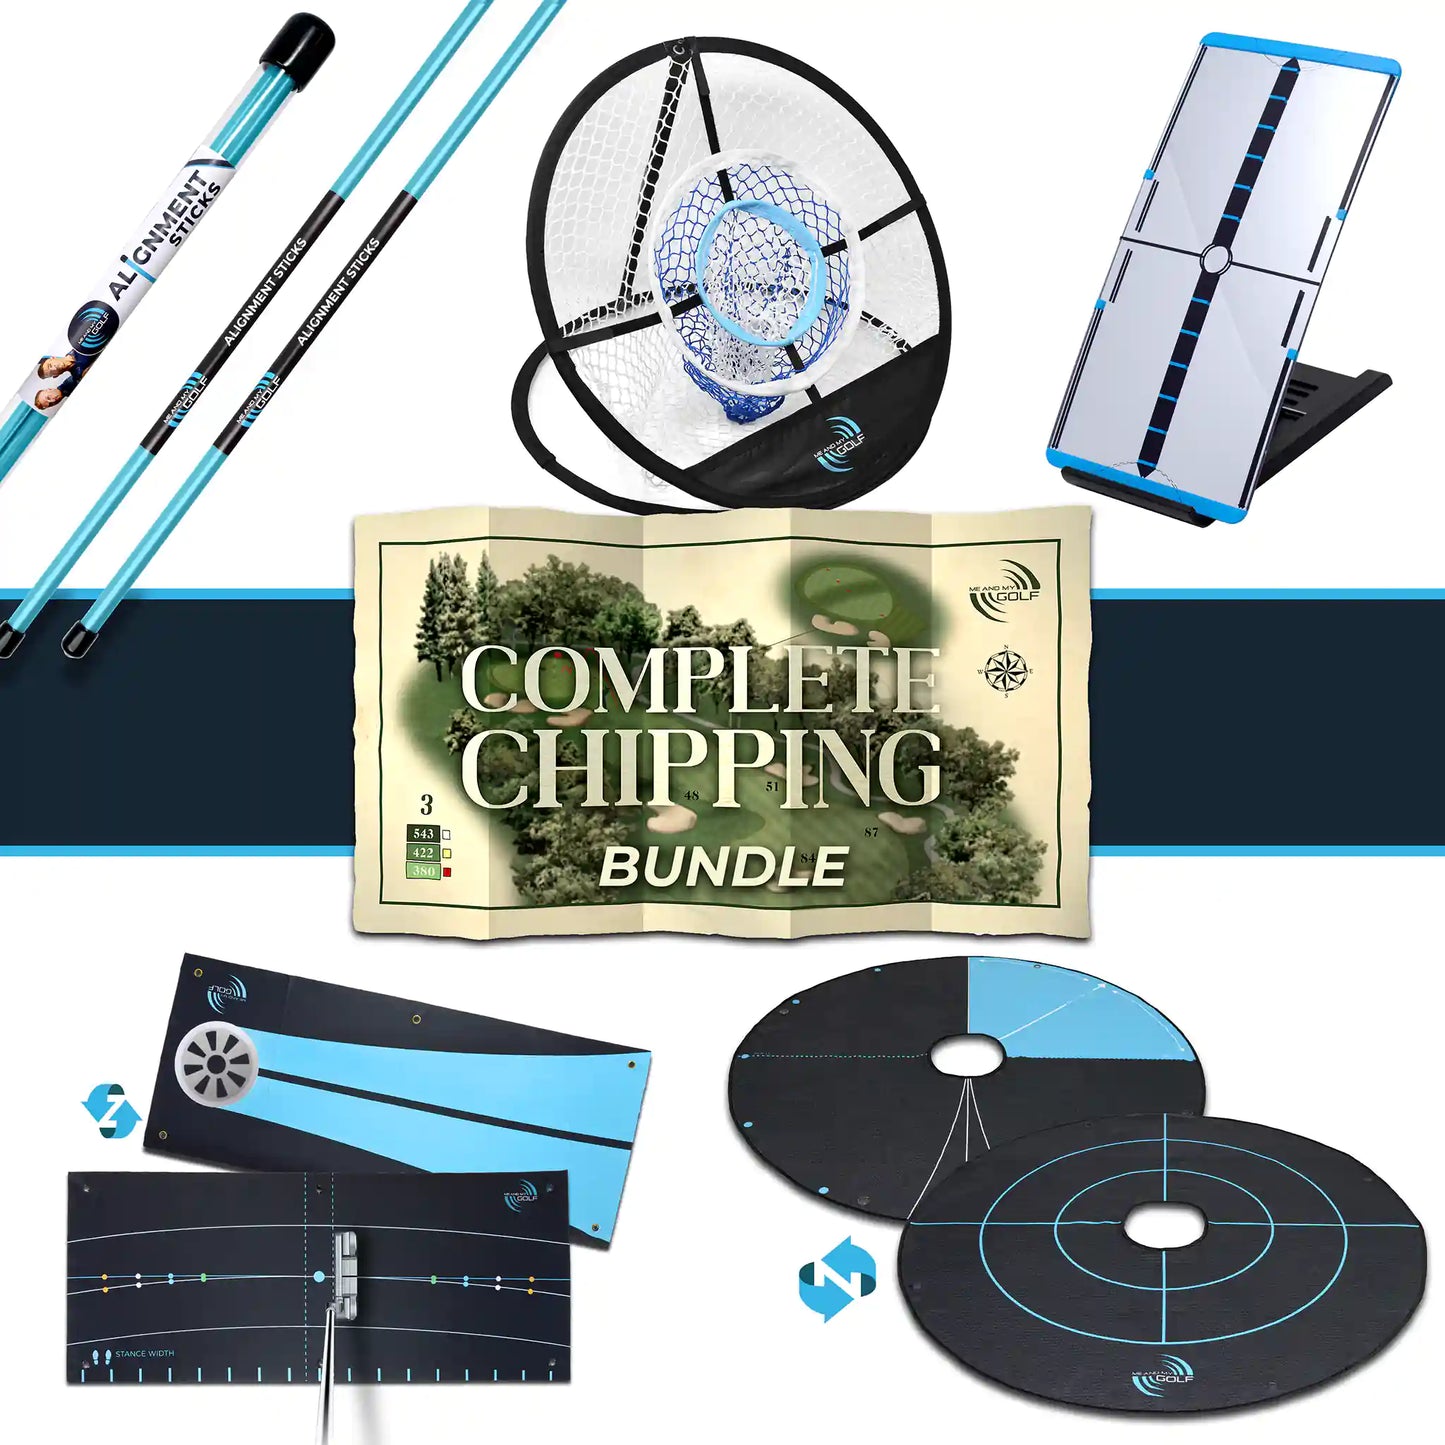 Complete Chipping Bundle